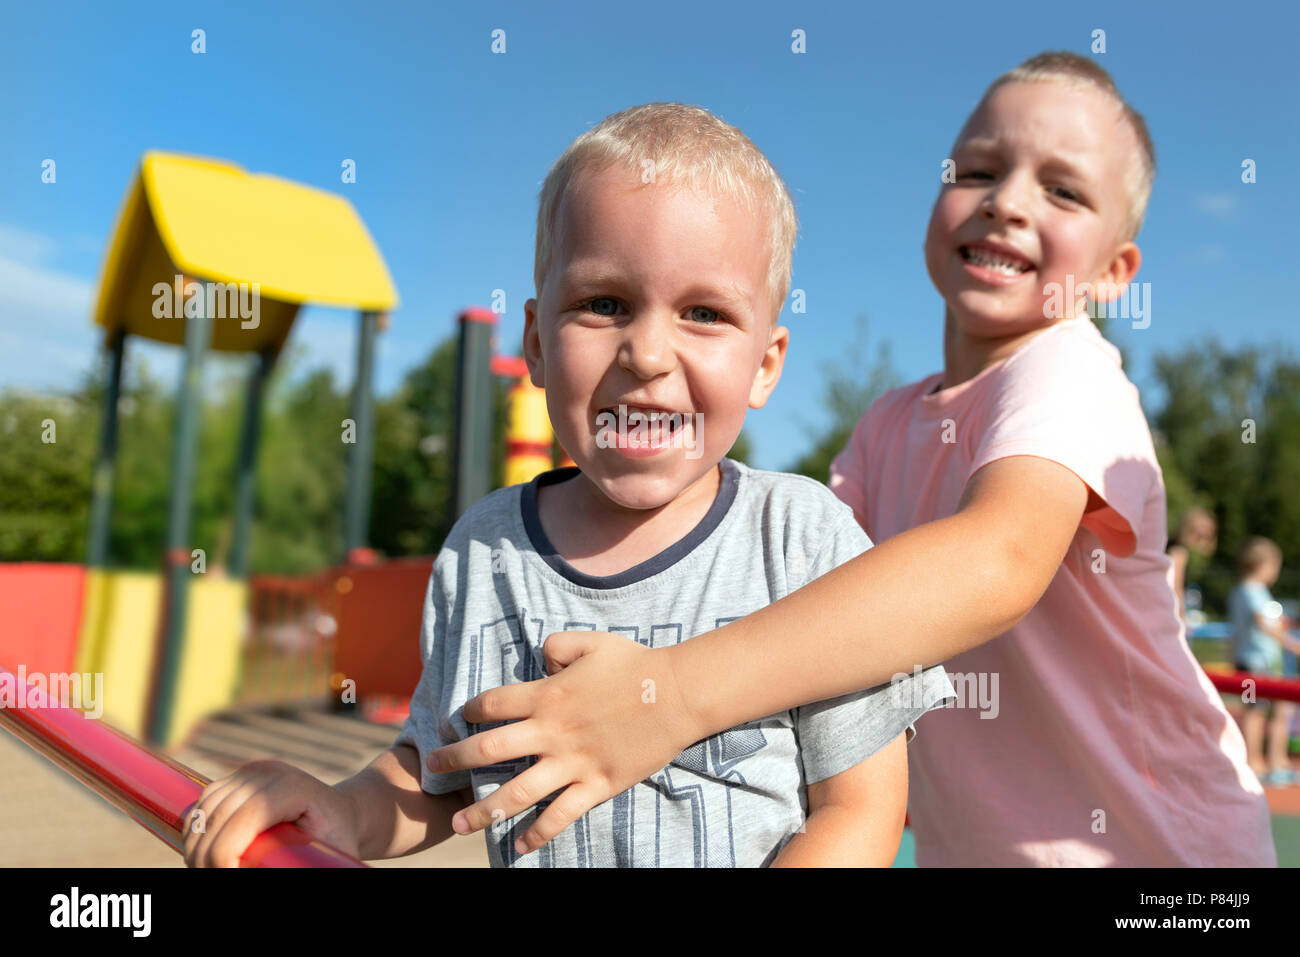 Two little boys playing together and having fun. Lifestyle family moment of siblings on playground. Stock Photo